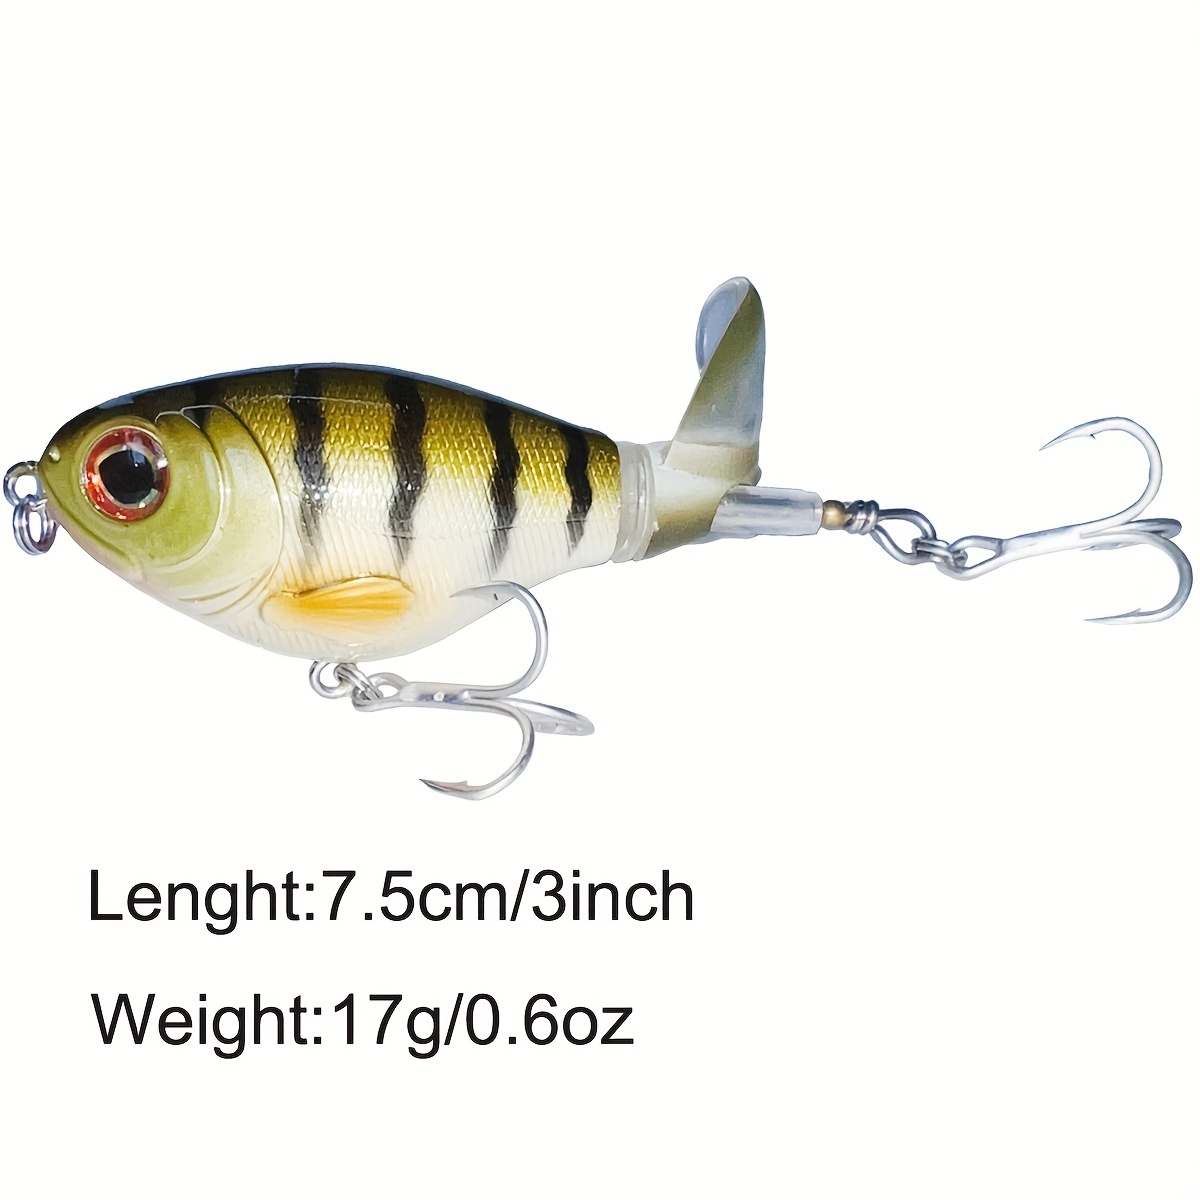 TRUSCEND Diving Fishing Lures with BKK Hooks, Pencil Plopper Fishing Lures  for Bass Catfish Pike Perch, Top Water Bait with Propeller Tail, Pencil